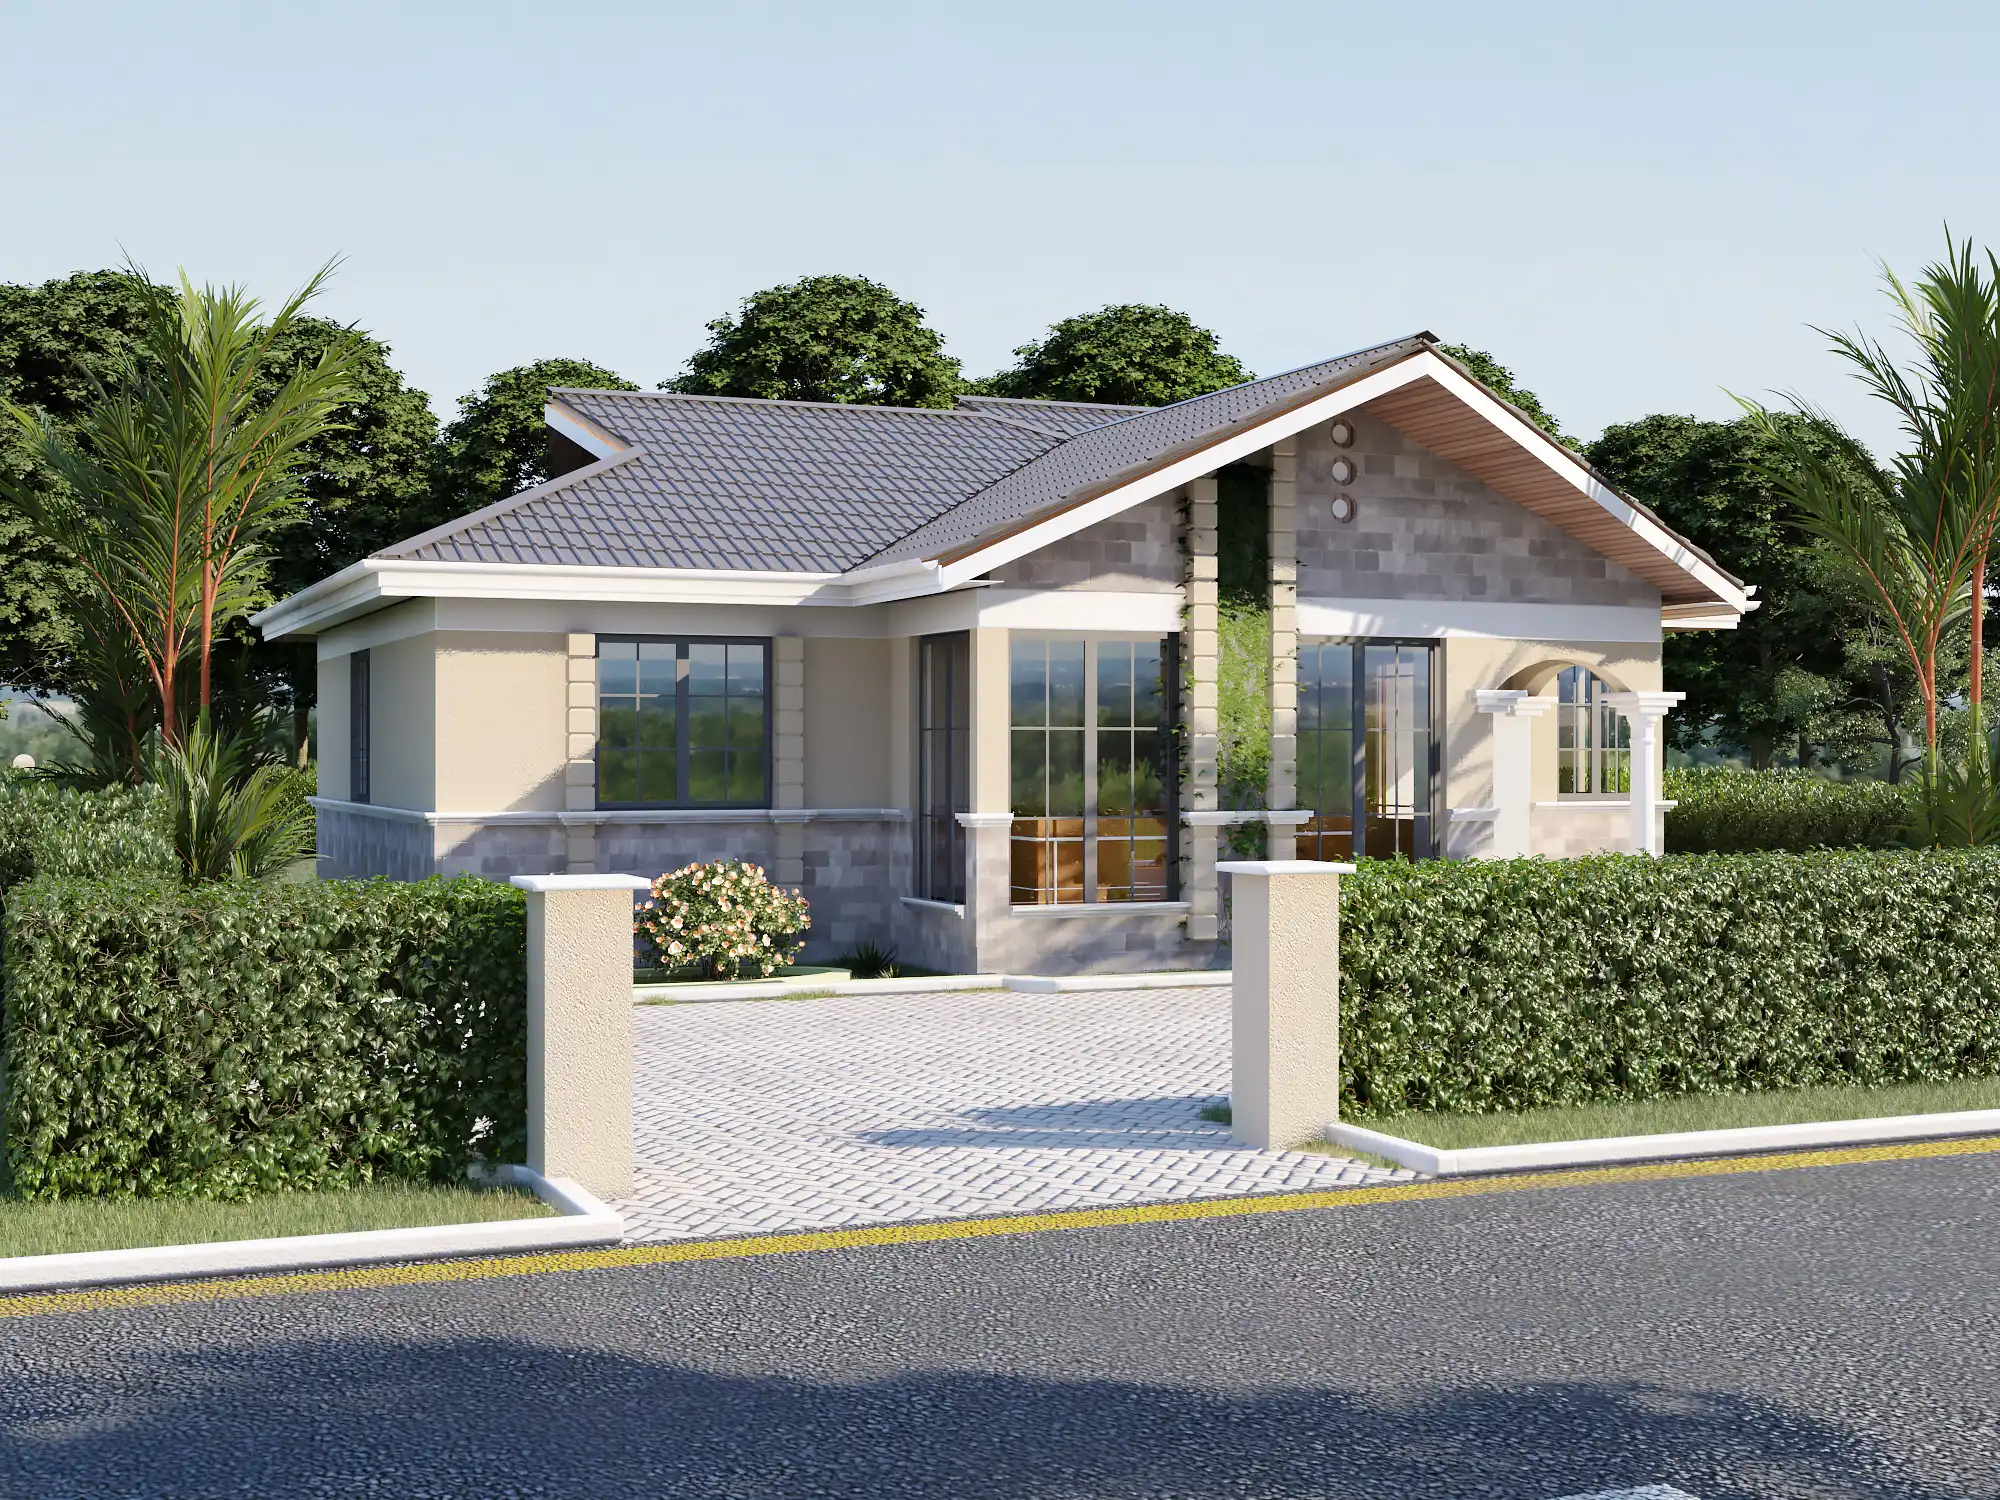 NACHU Bungalow - 3 Bed Pitch Roof Bungalow.jpg from Inuua Tujenge house plans with 3 bedrooms and 1 bathrooms. ( bungalow )